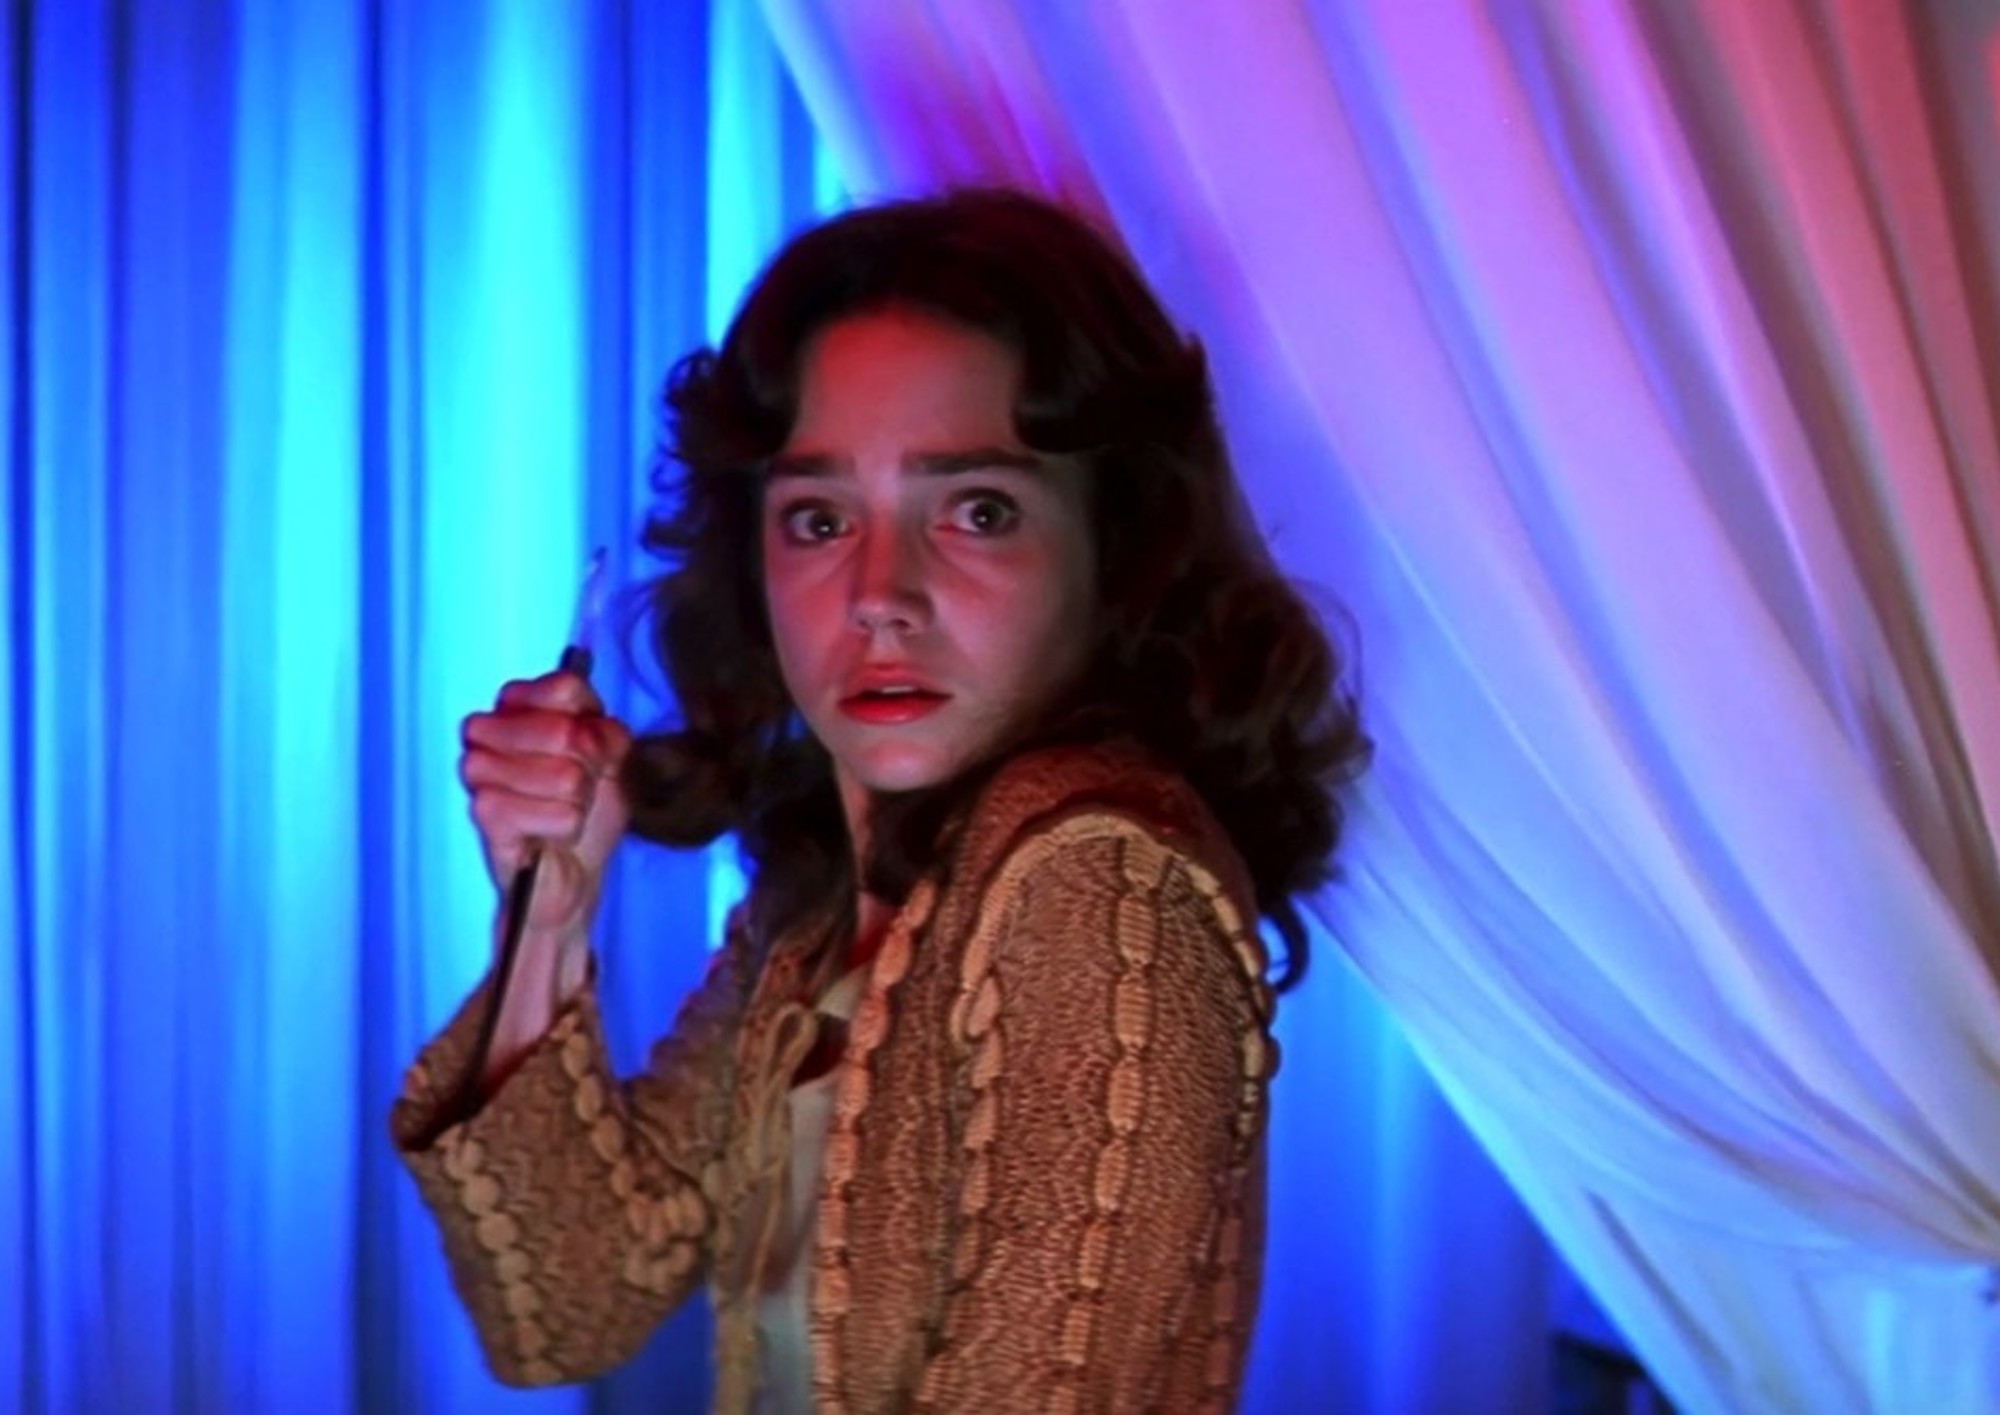 Image from the motion picture Suspiria